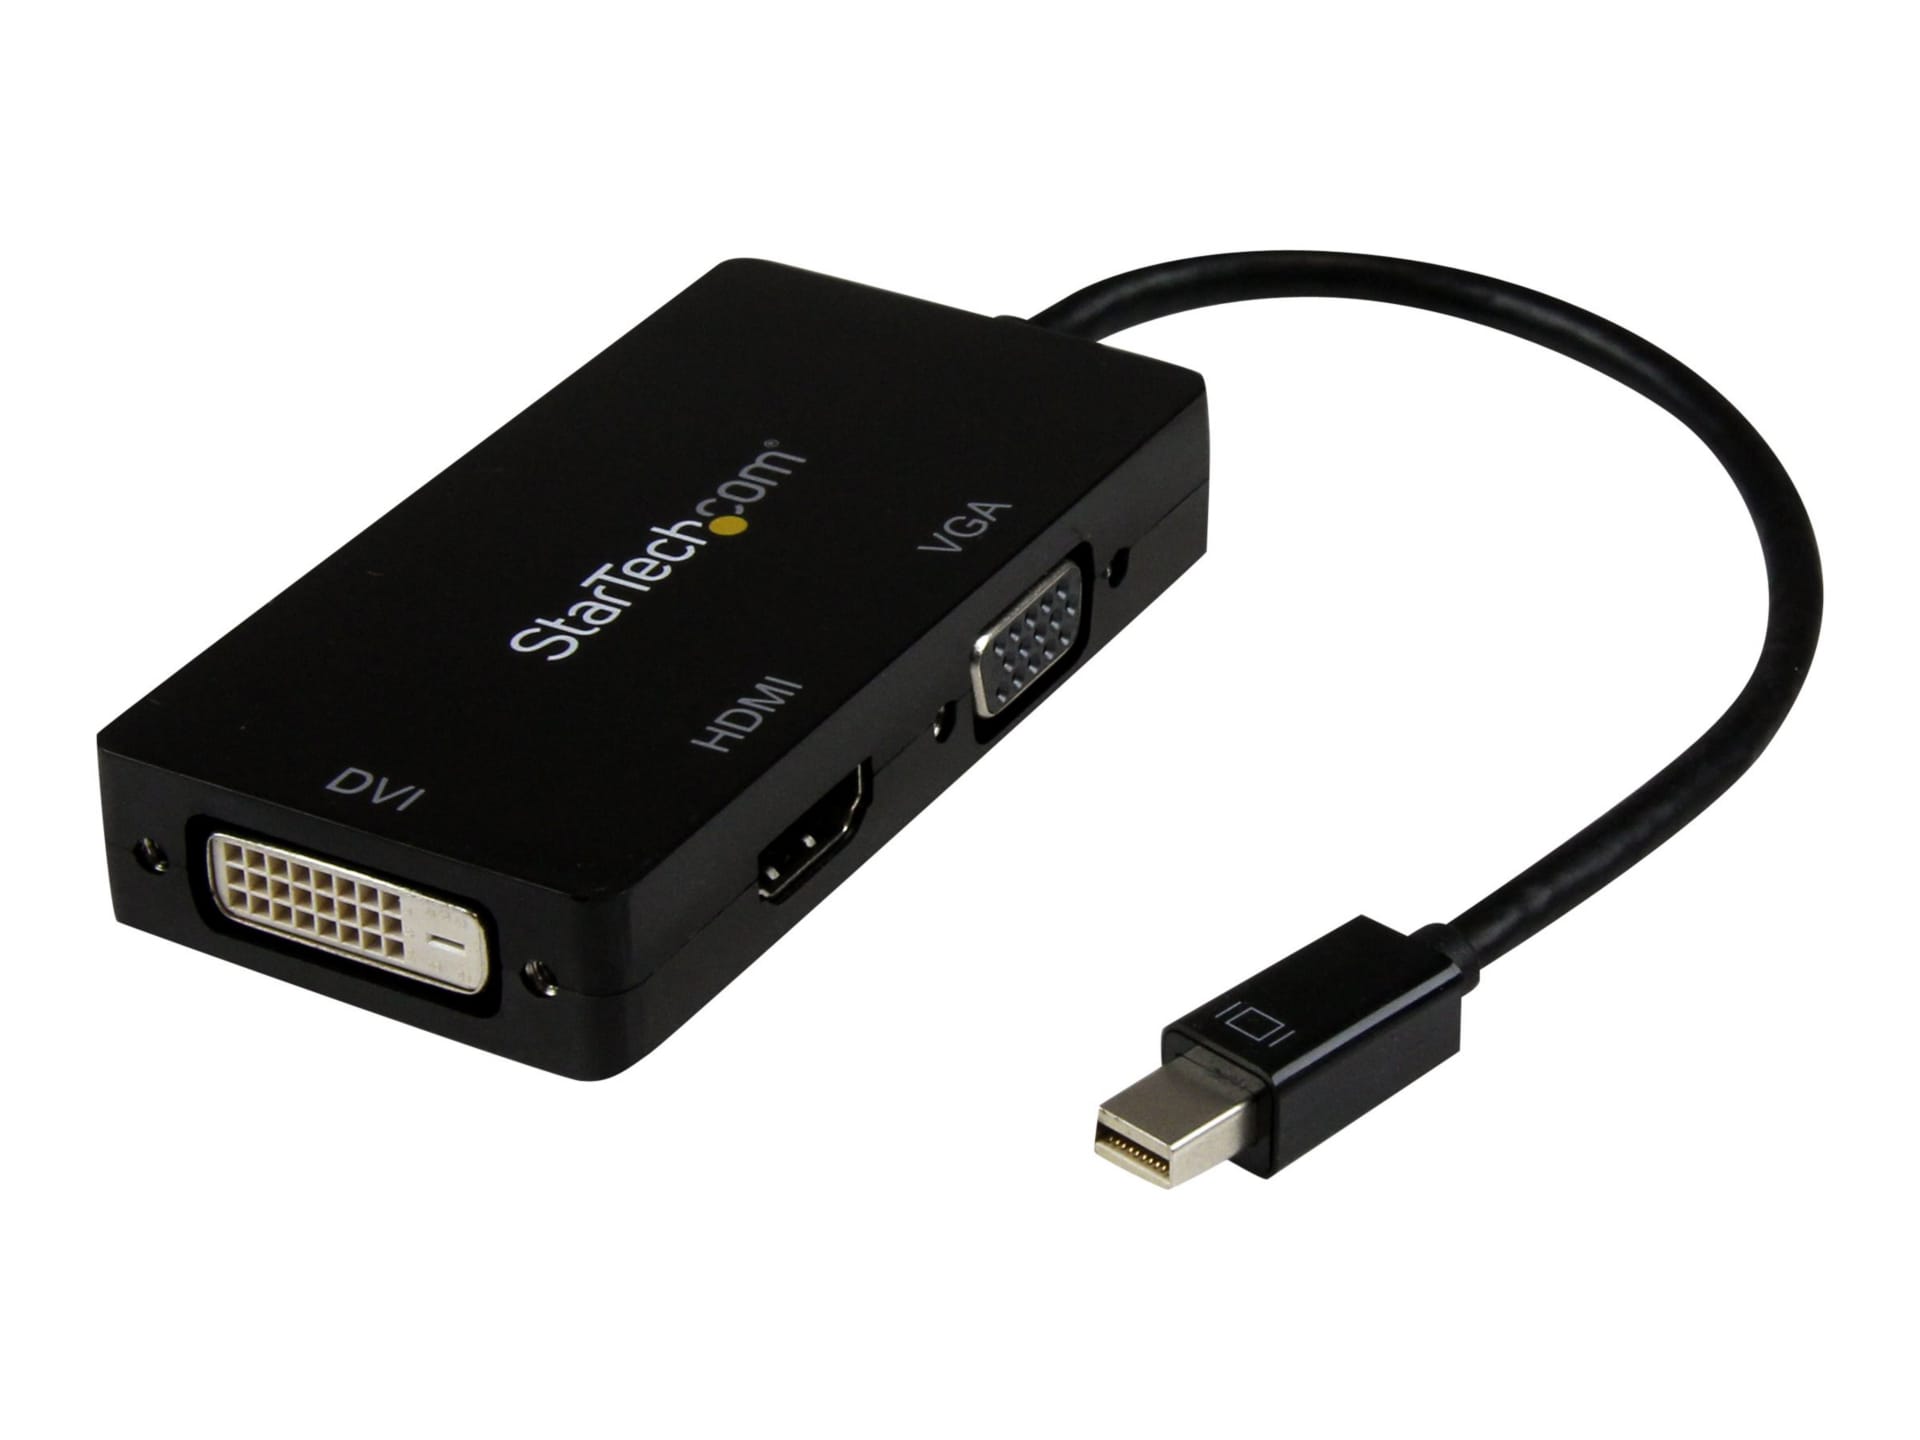 StarTech.com 3-in-1 Mini DisplayPort Adapter - mDP to VGA, DVI-D or HDMI - MDP2VGDVHD Monitor Cables & Adapters - CDW.com